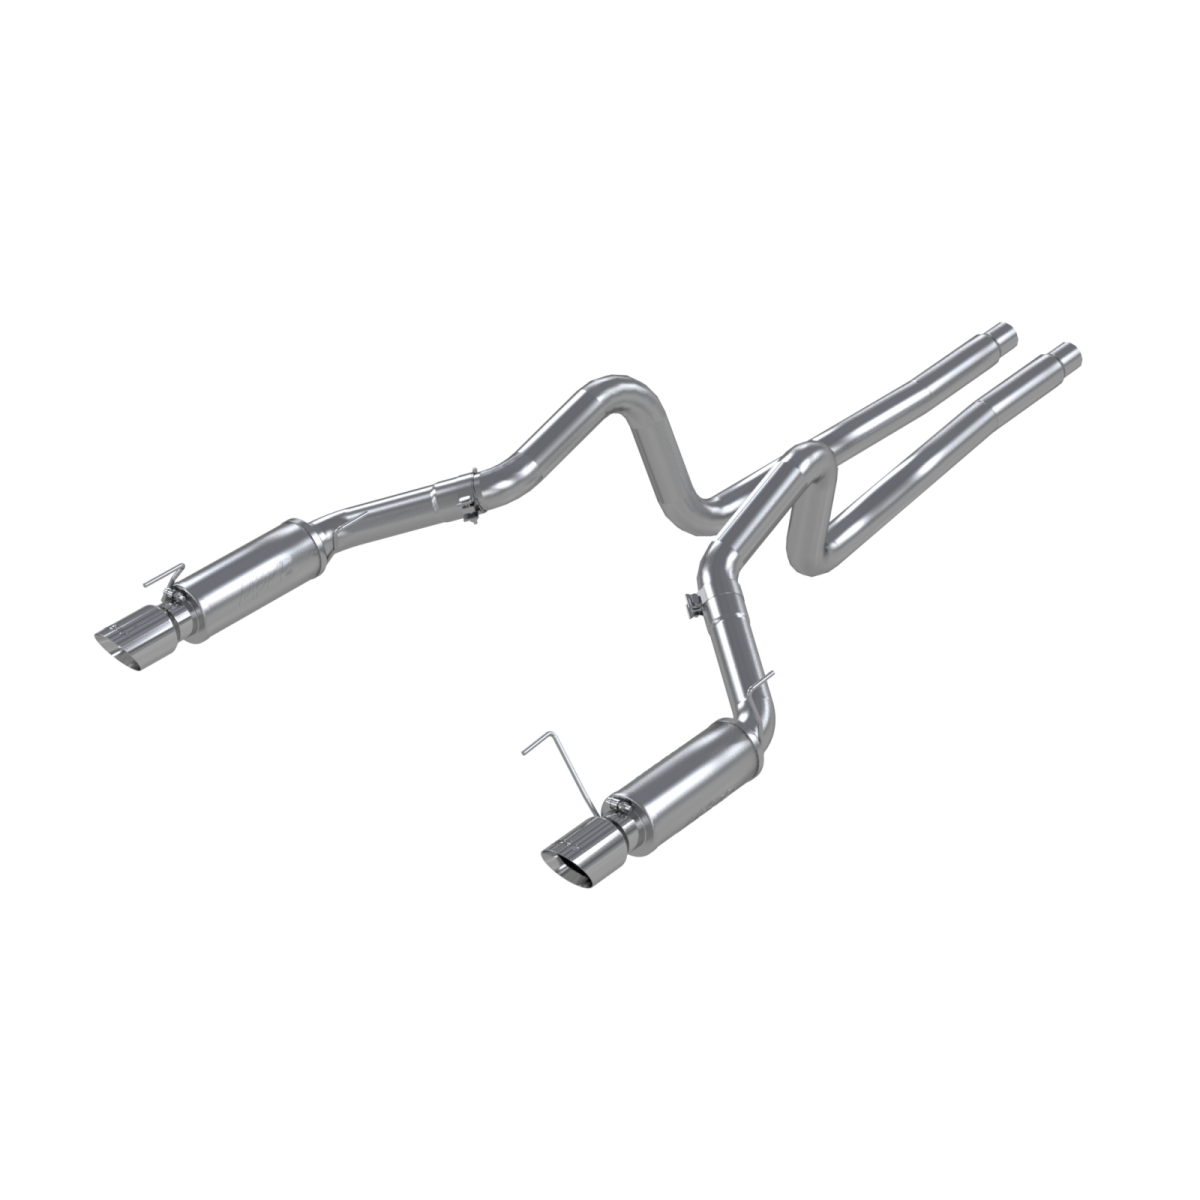 MBRP - MBRP Dual Mufflers Cat Back Exhaust System Dual Split Rear Street Version 4 Inch Tips For 05-09 Ford Mustang GT 4.6L 07-10 Ford Shelby GT500 S7270AL